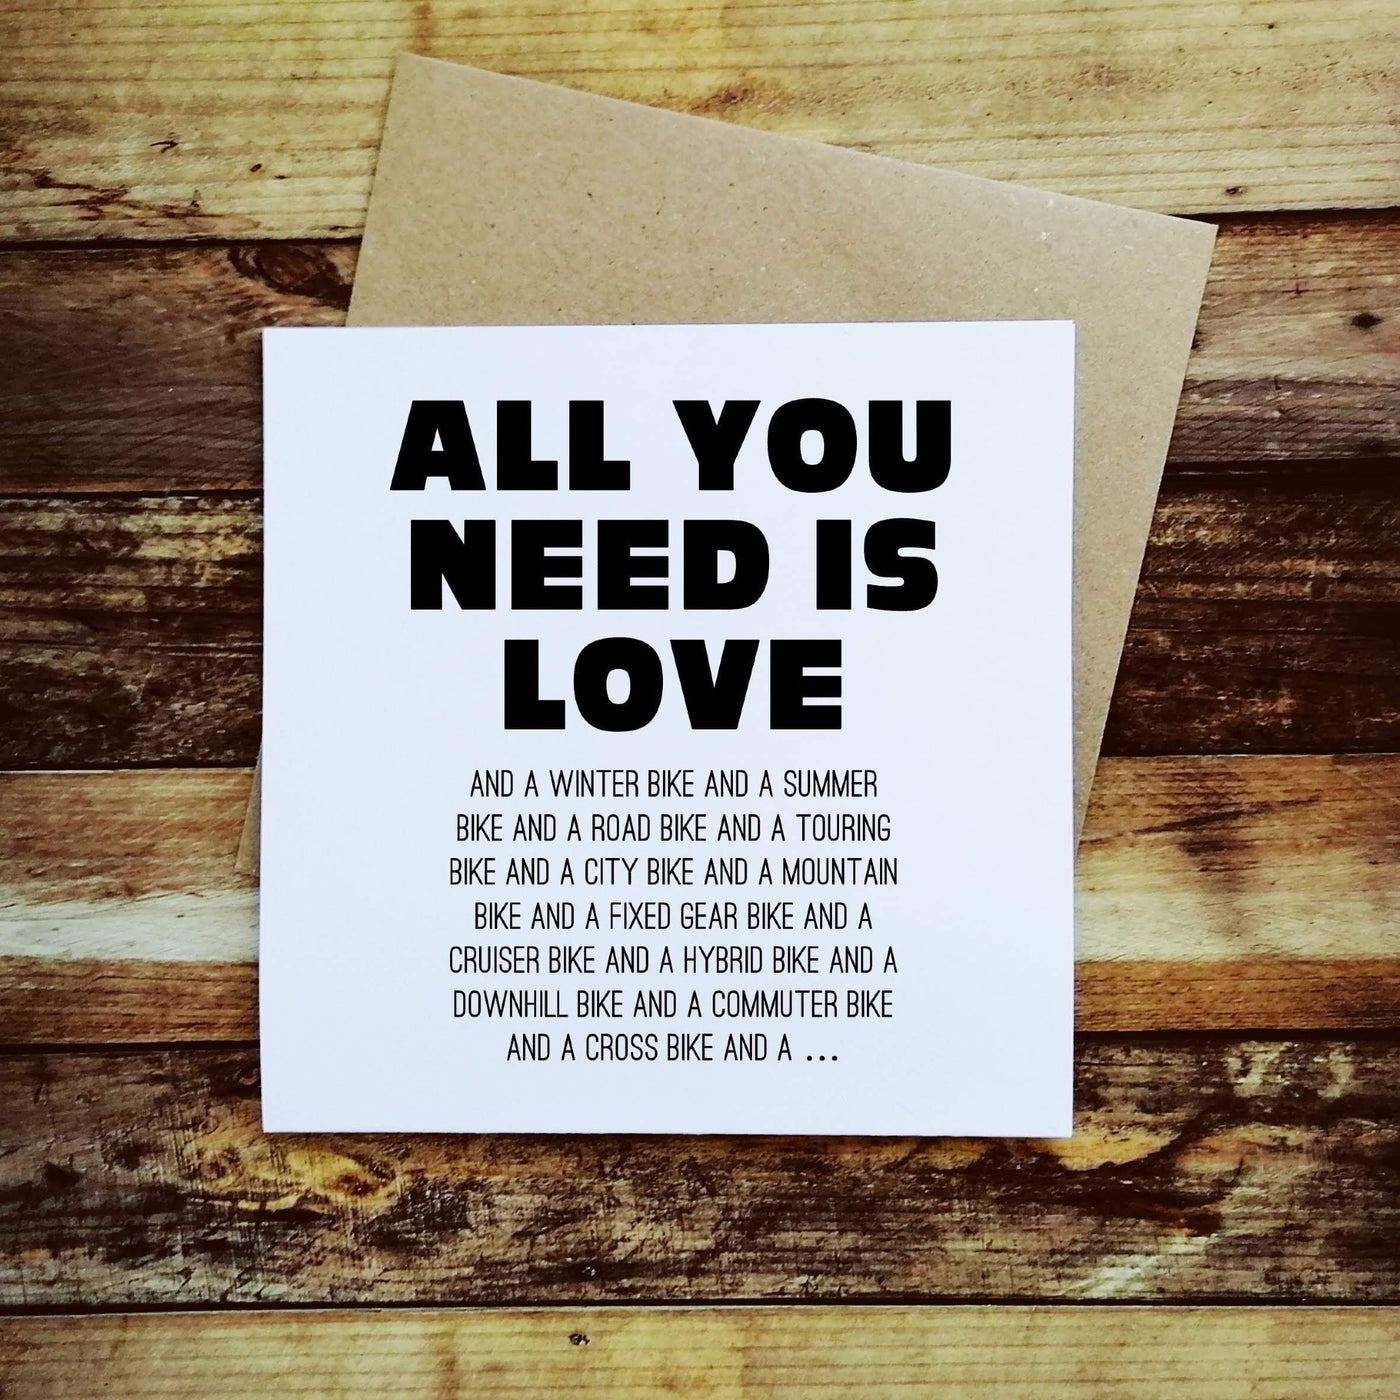 All you need is Love and... Bikes - Greetings Card-Worry Less Design-Cycling,Greetings-Card